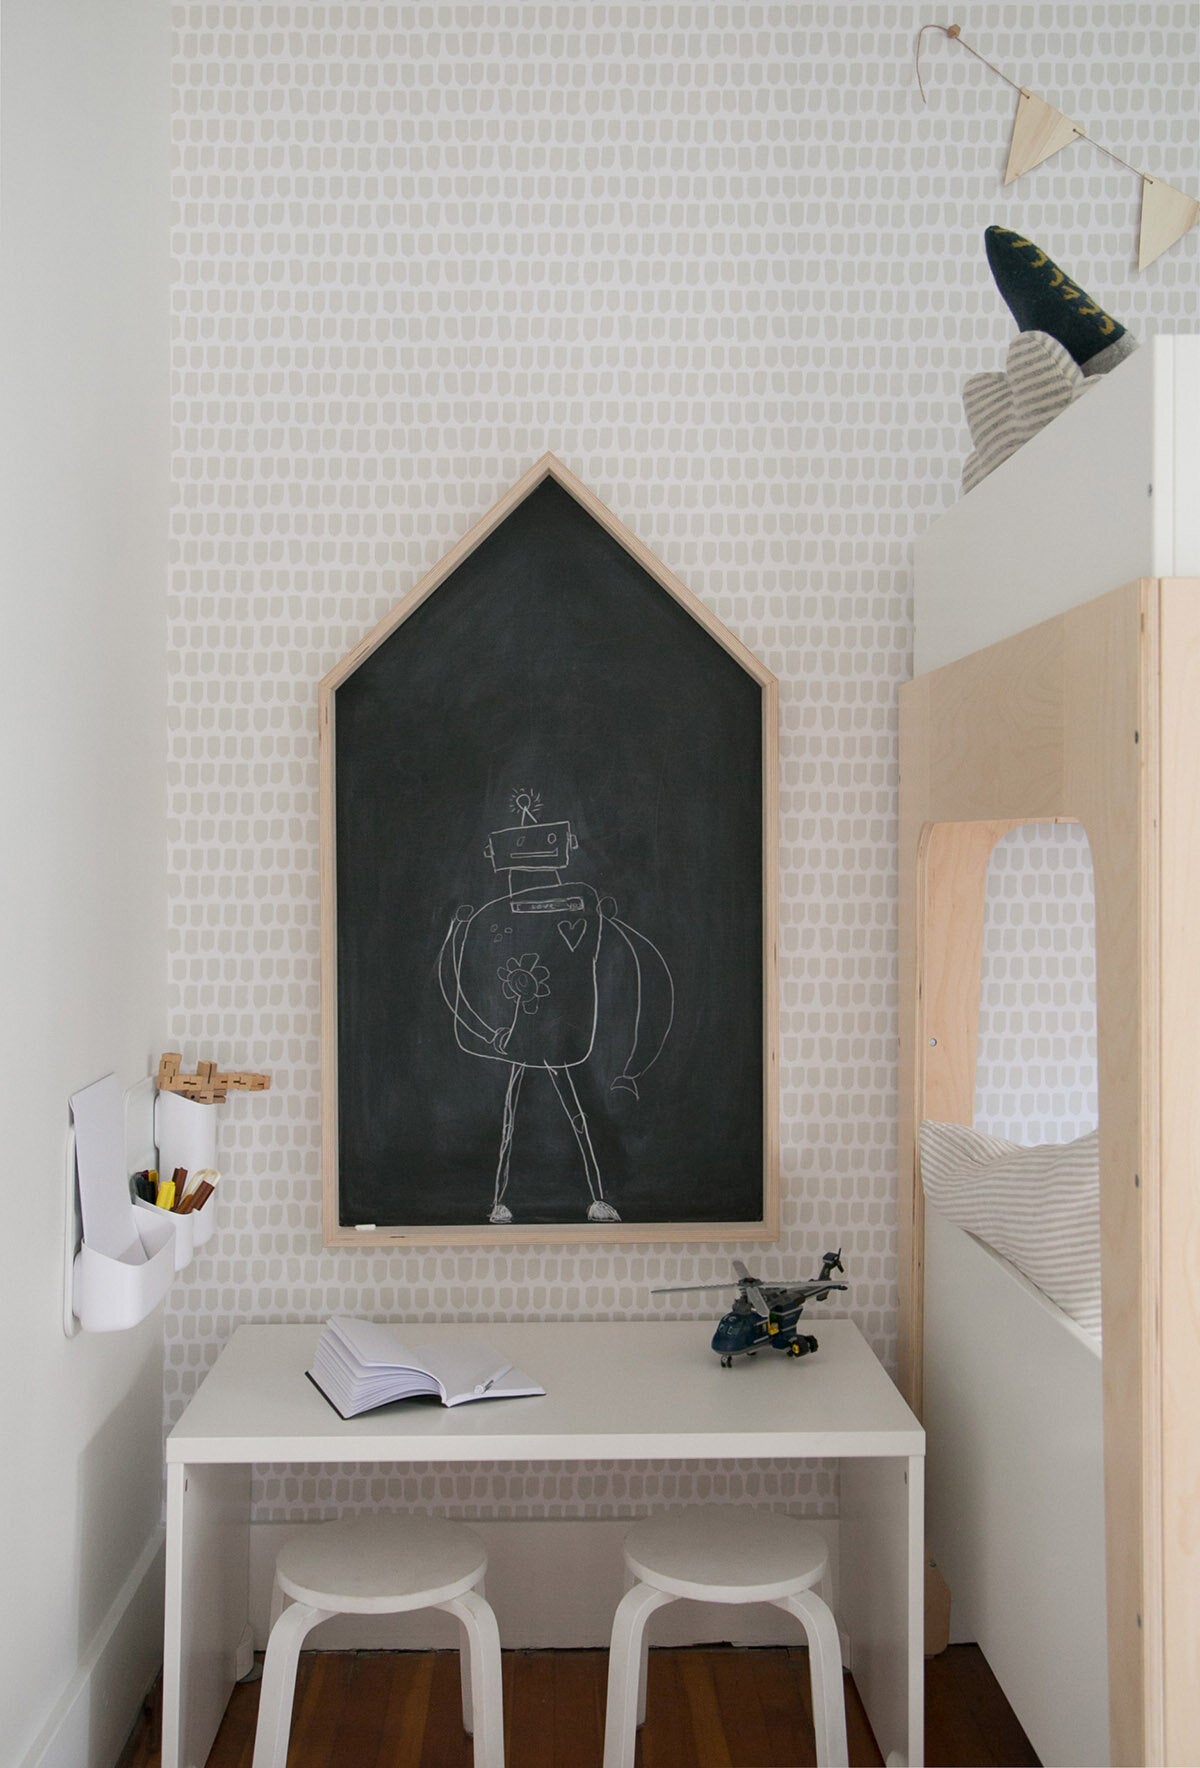 Modern boys room art corner with house shaped chalkboard wall, removable wallpaper and robot theme